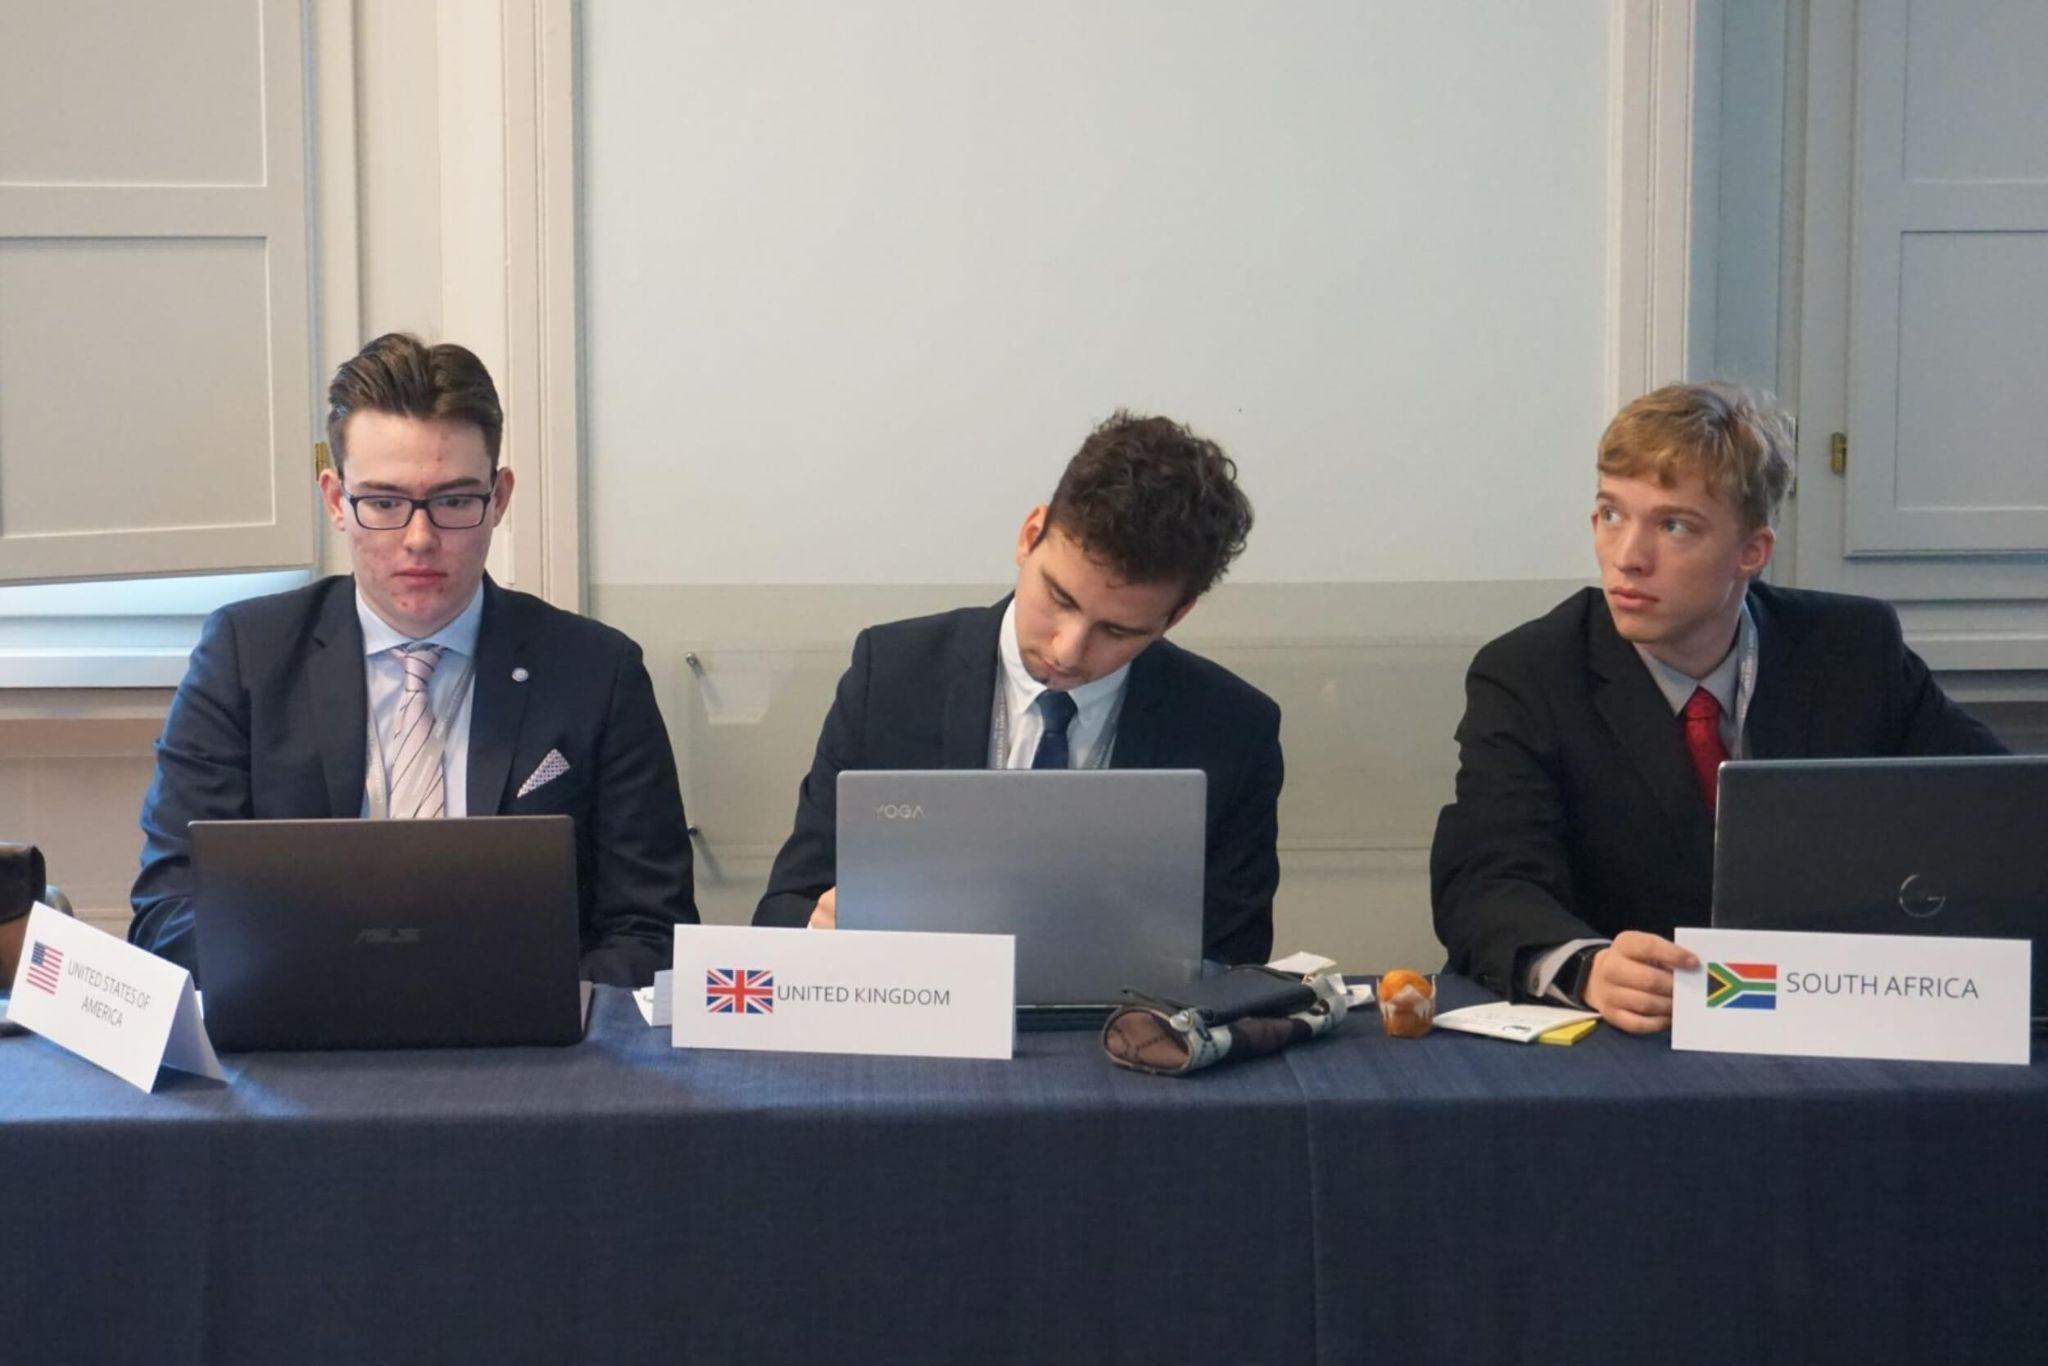 A group of business students at a university in Rome participating in an international panel activity